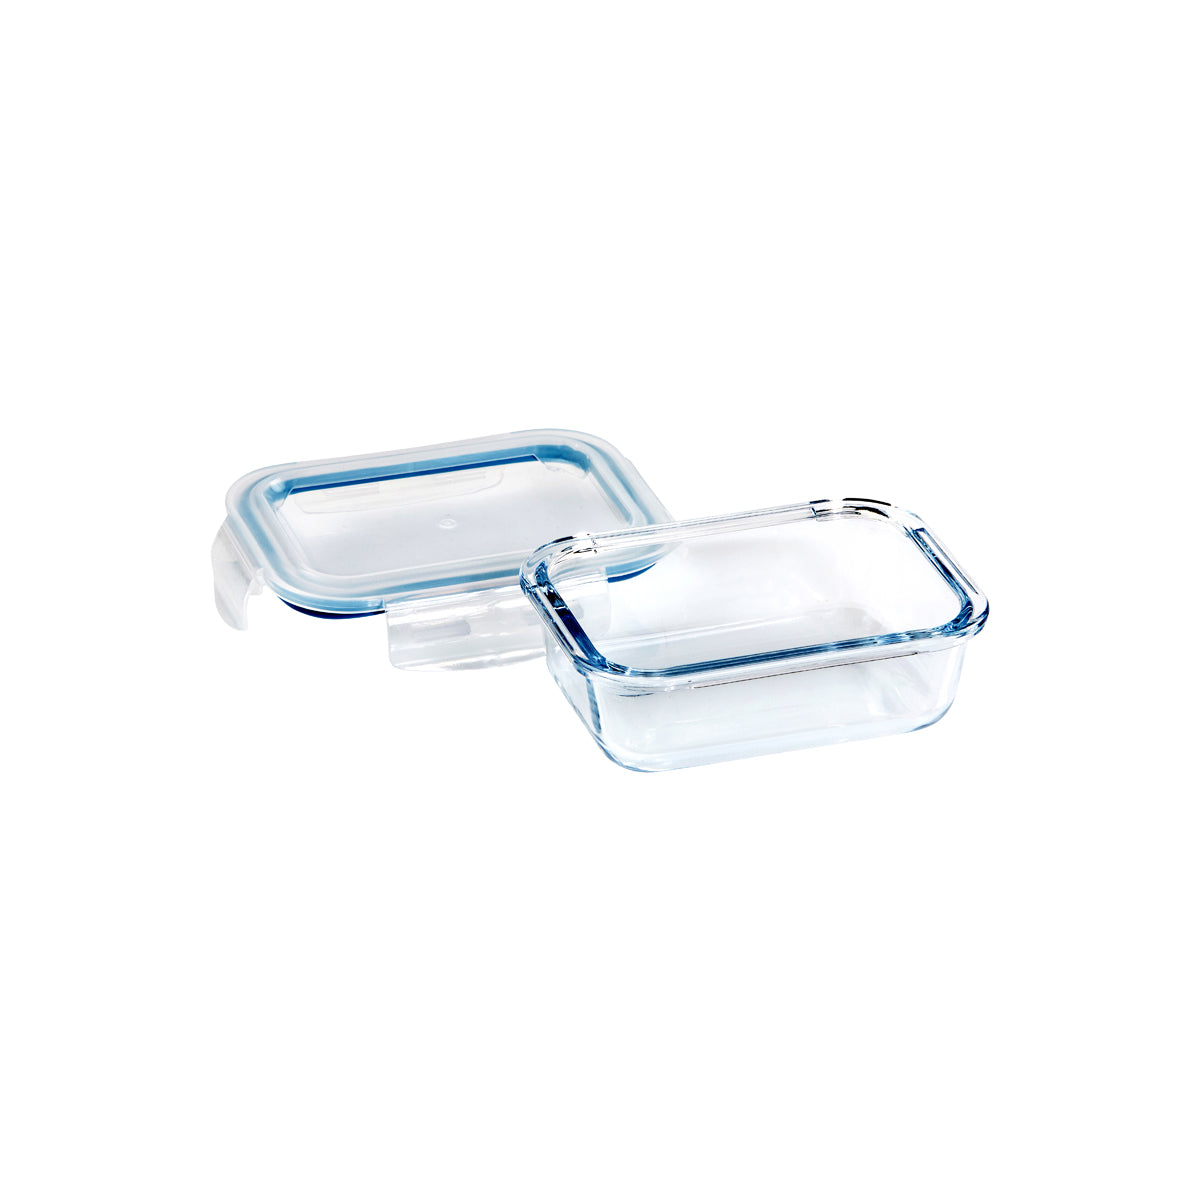 WLT48170 Wiltshire Rectangular Glass Container 370ml Tomkin Australia Hospitality Supplies